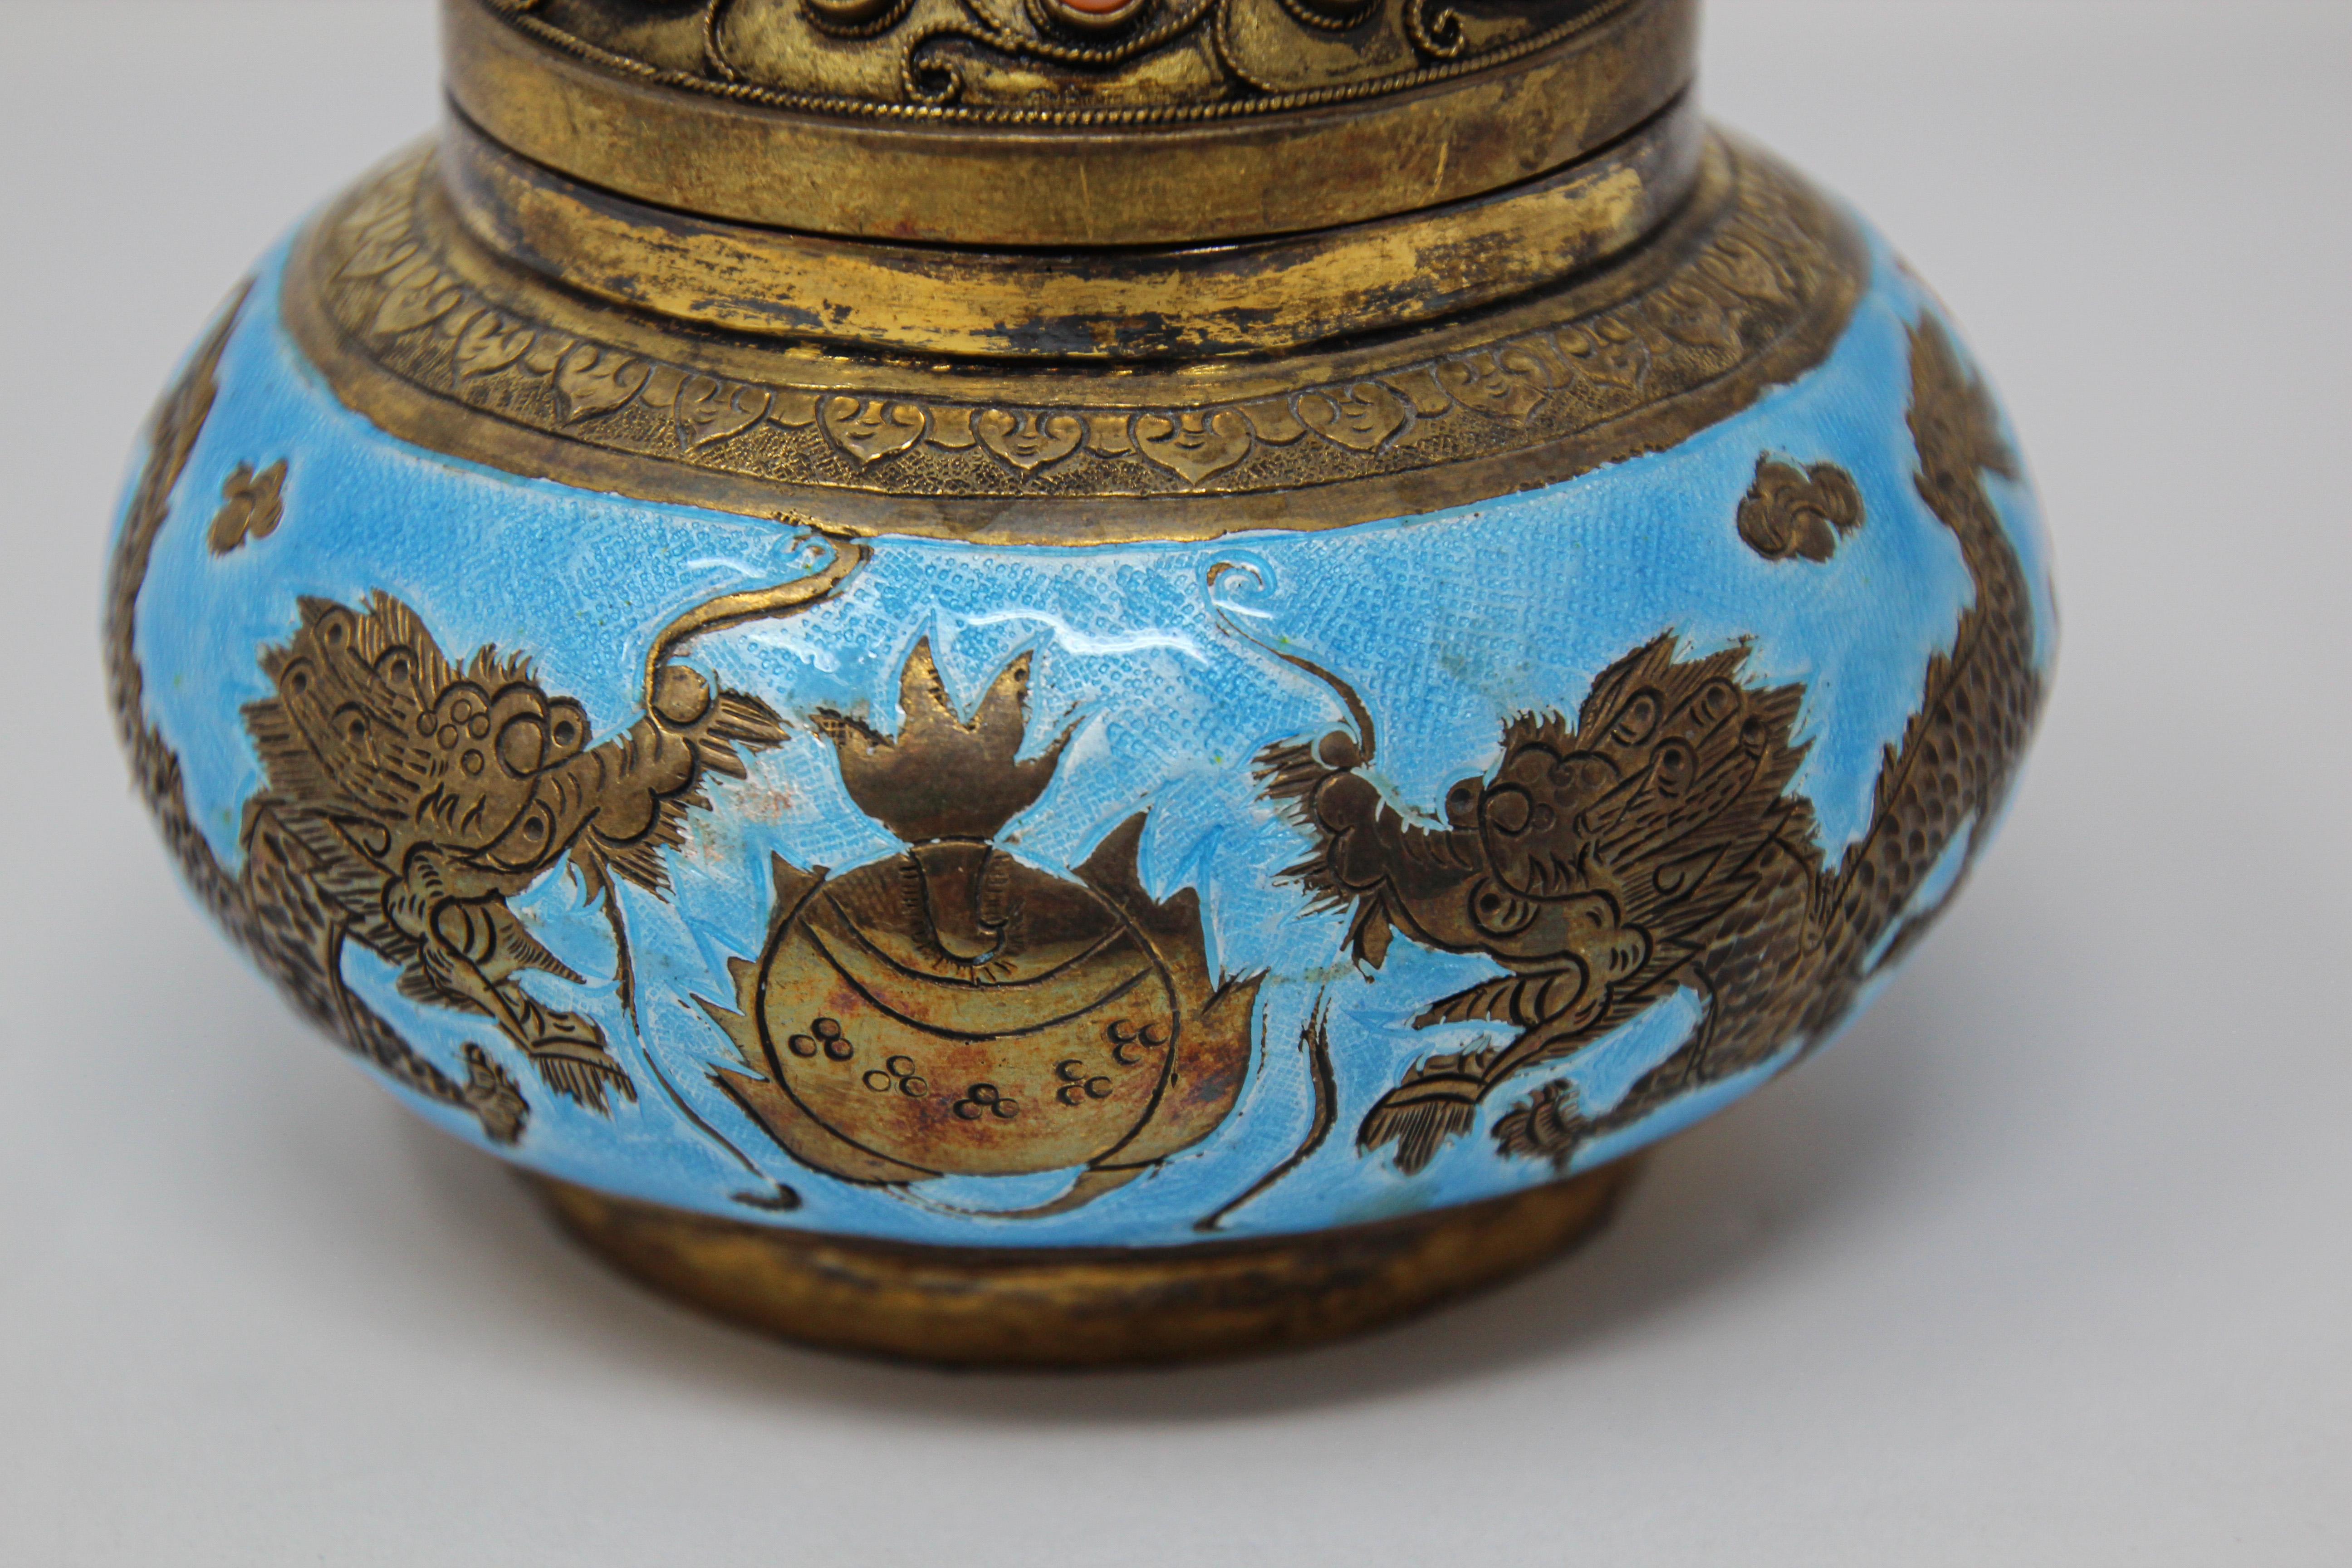 20th Century Chinese Export Brass Snuff Box with Turquoise Enamel Dragons and Beads Inlaid